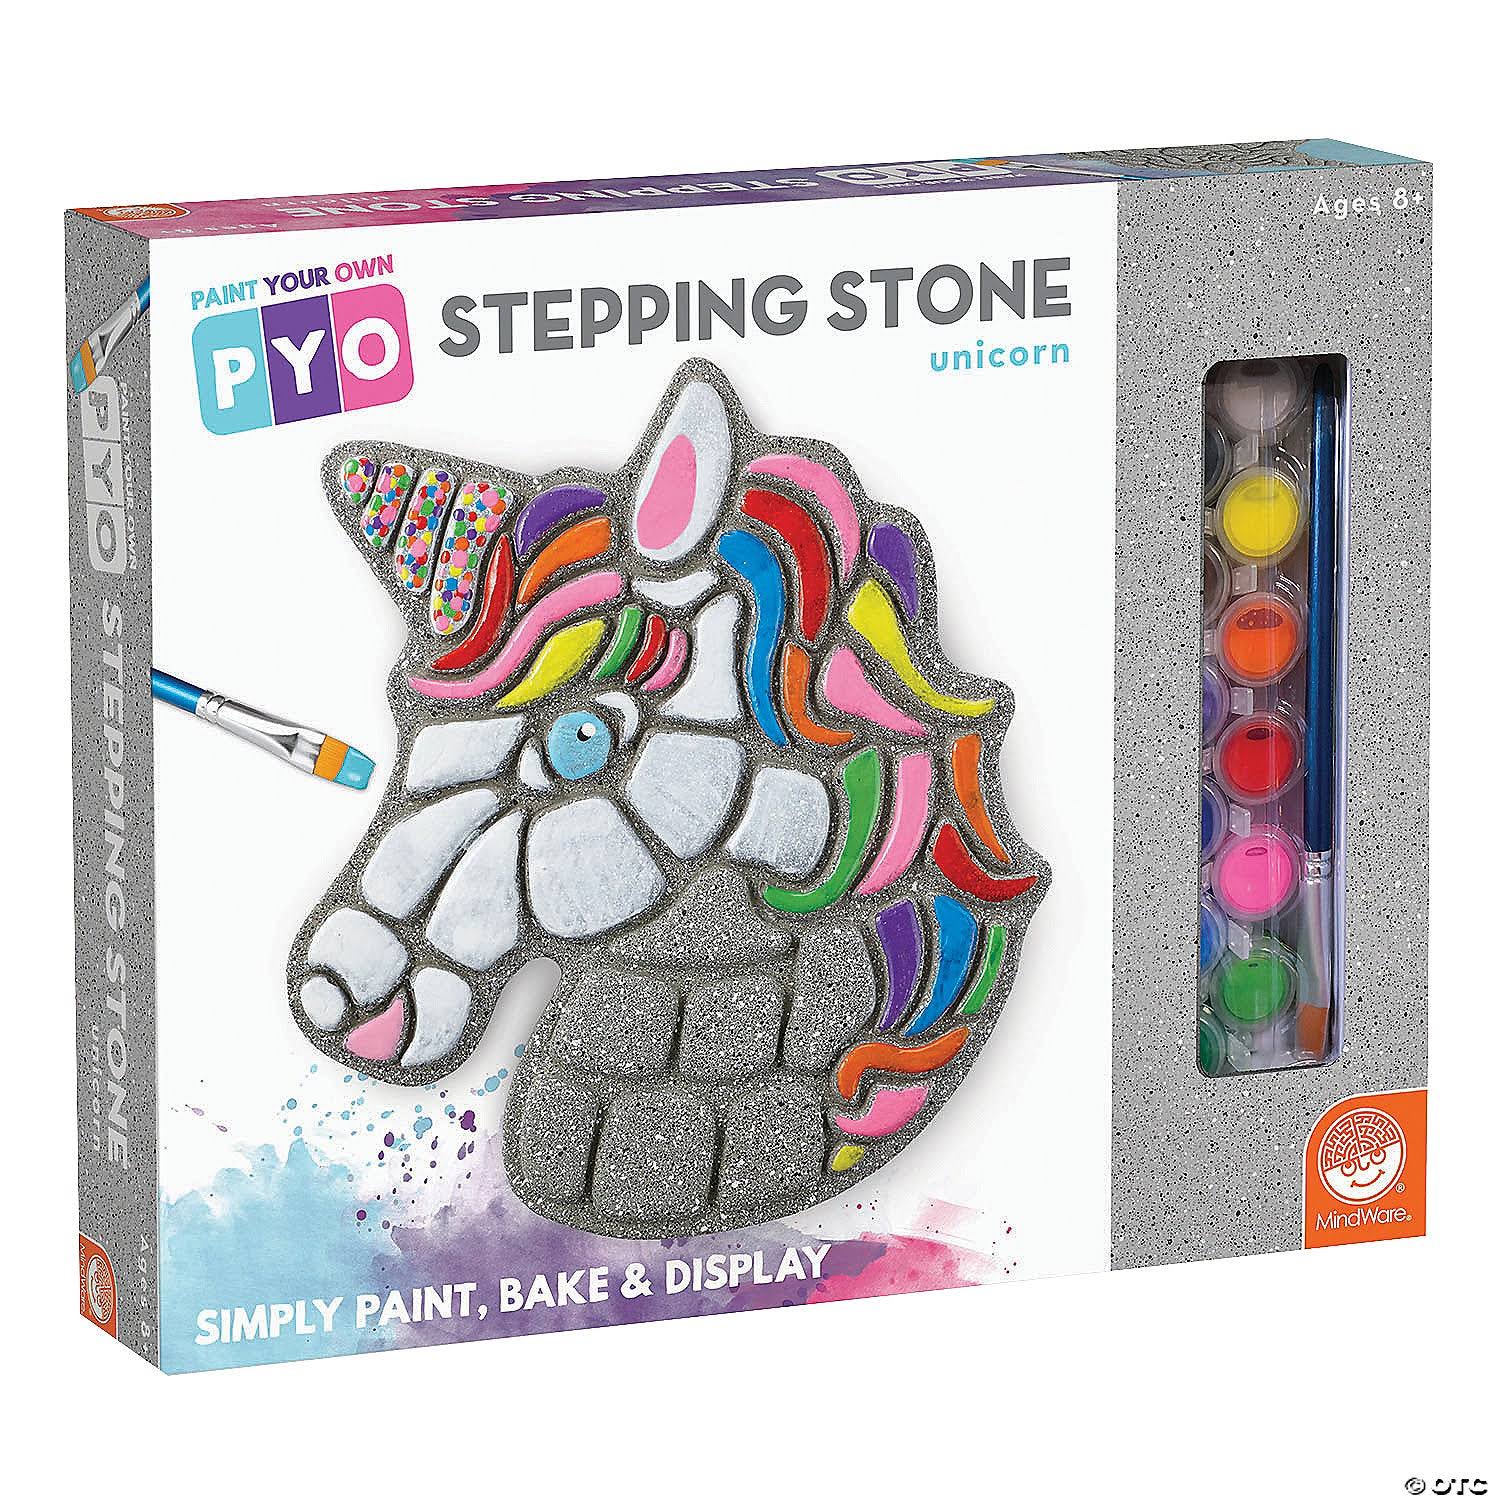 Paint Your Own Stepping Stone | MindWare